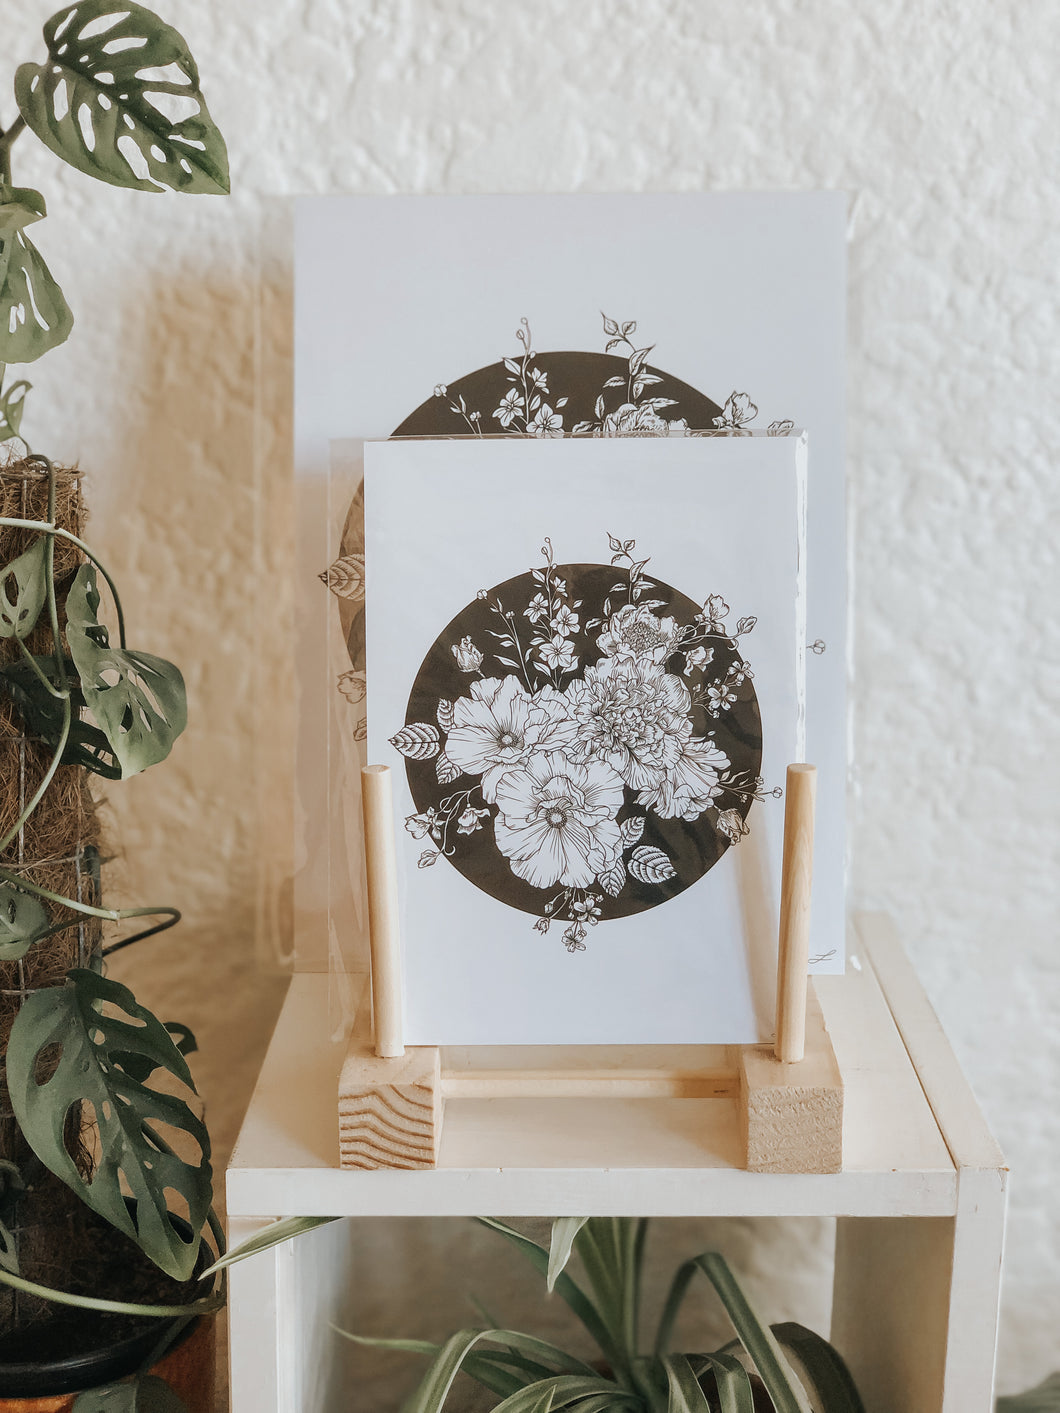 Black and white illustration of botanicals within a black void background. Pair your prints with other illustrations to create a whimsical story of your own.